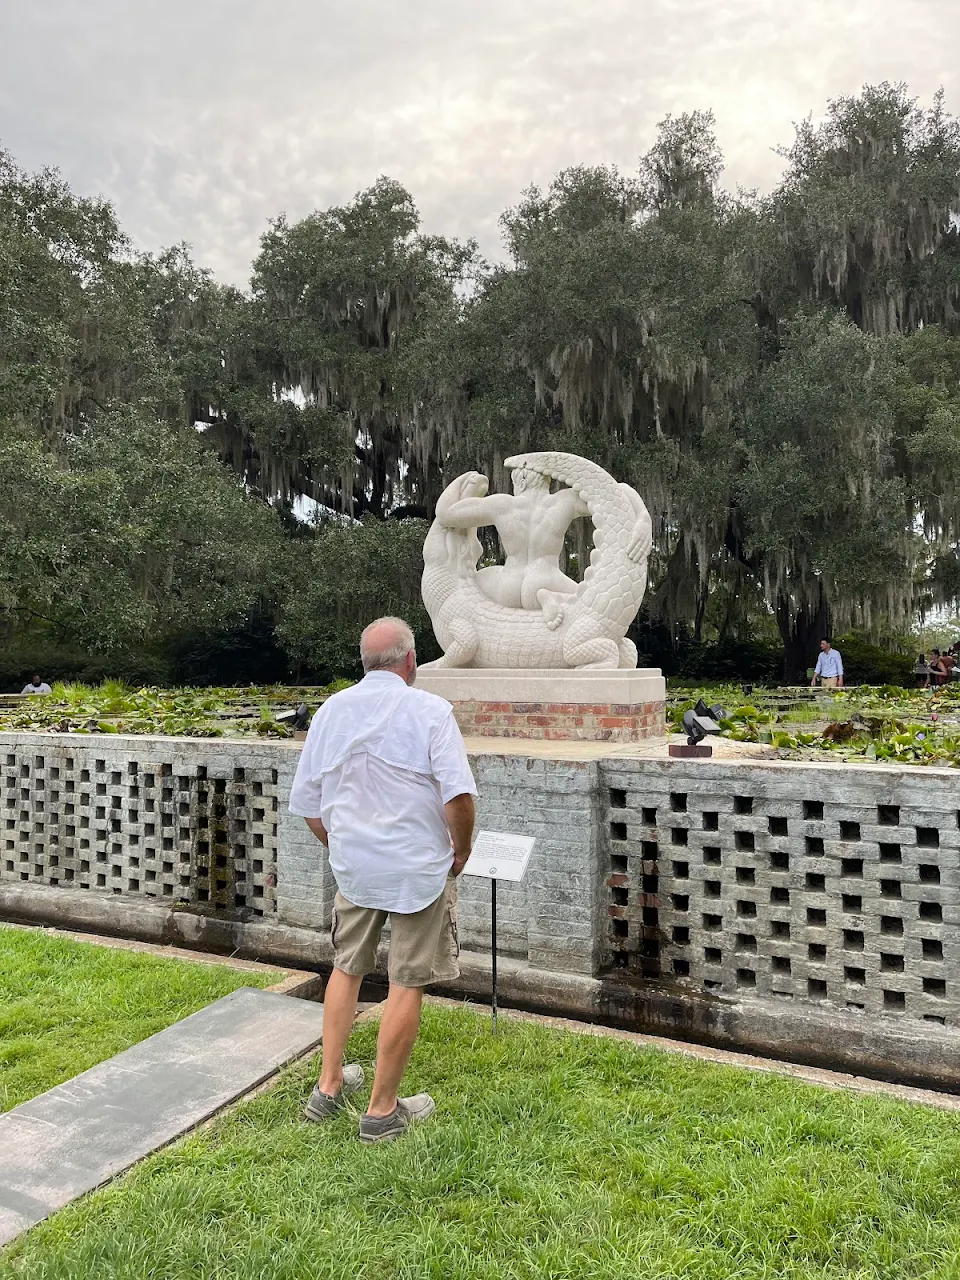 Photo from the Brookgreen Gardens, in Murrels Inlet, SC.